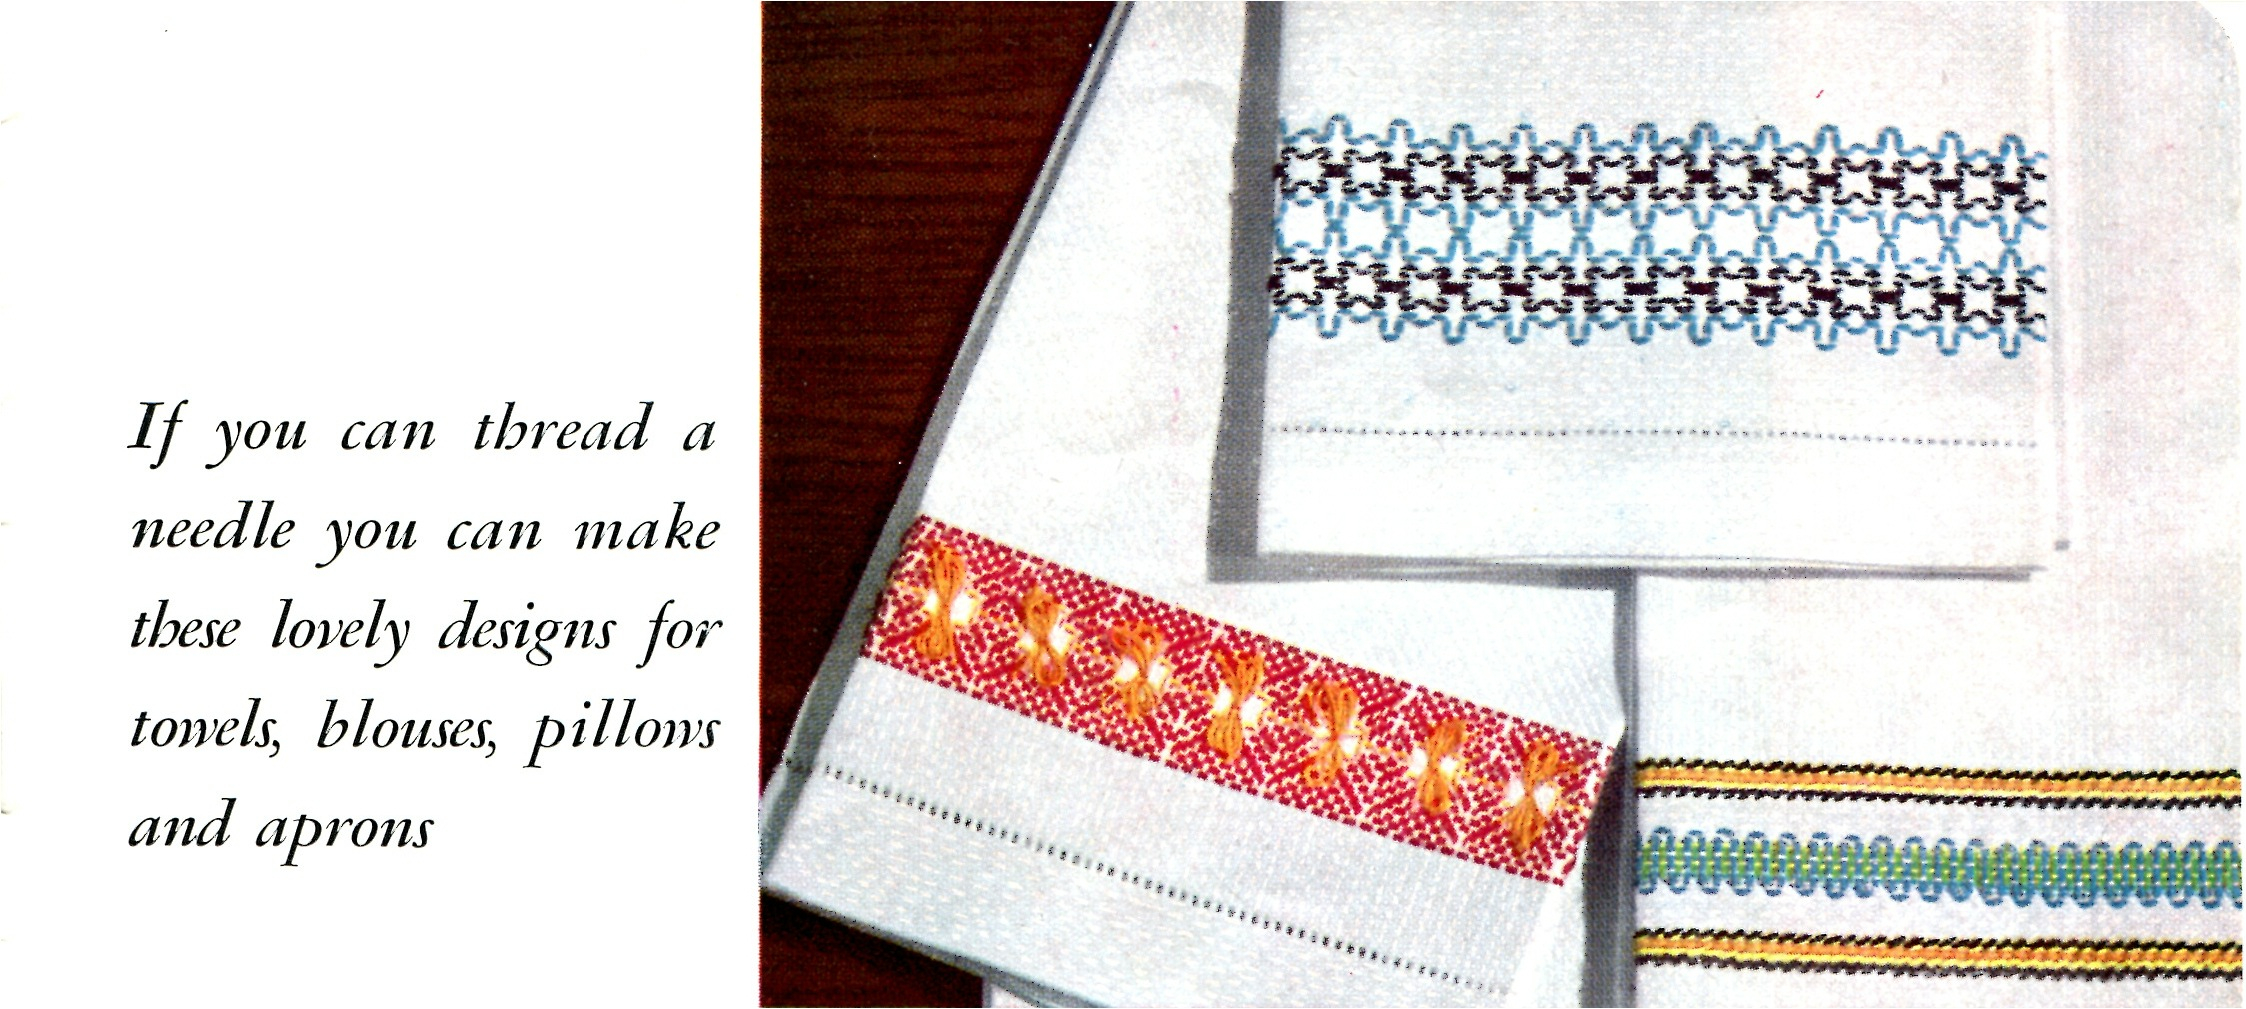 Huck Embroidery Patterns How To Do Swedish Huck Weaving Embroidery Vintage Crafts And More